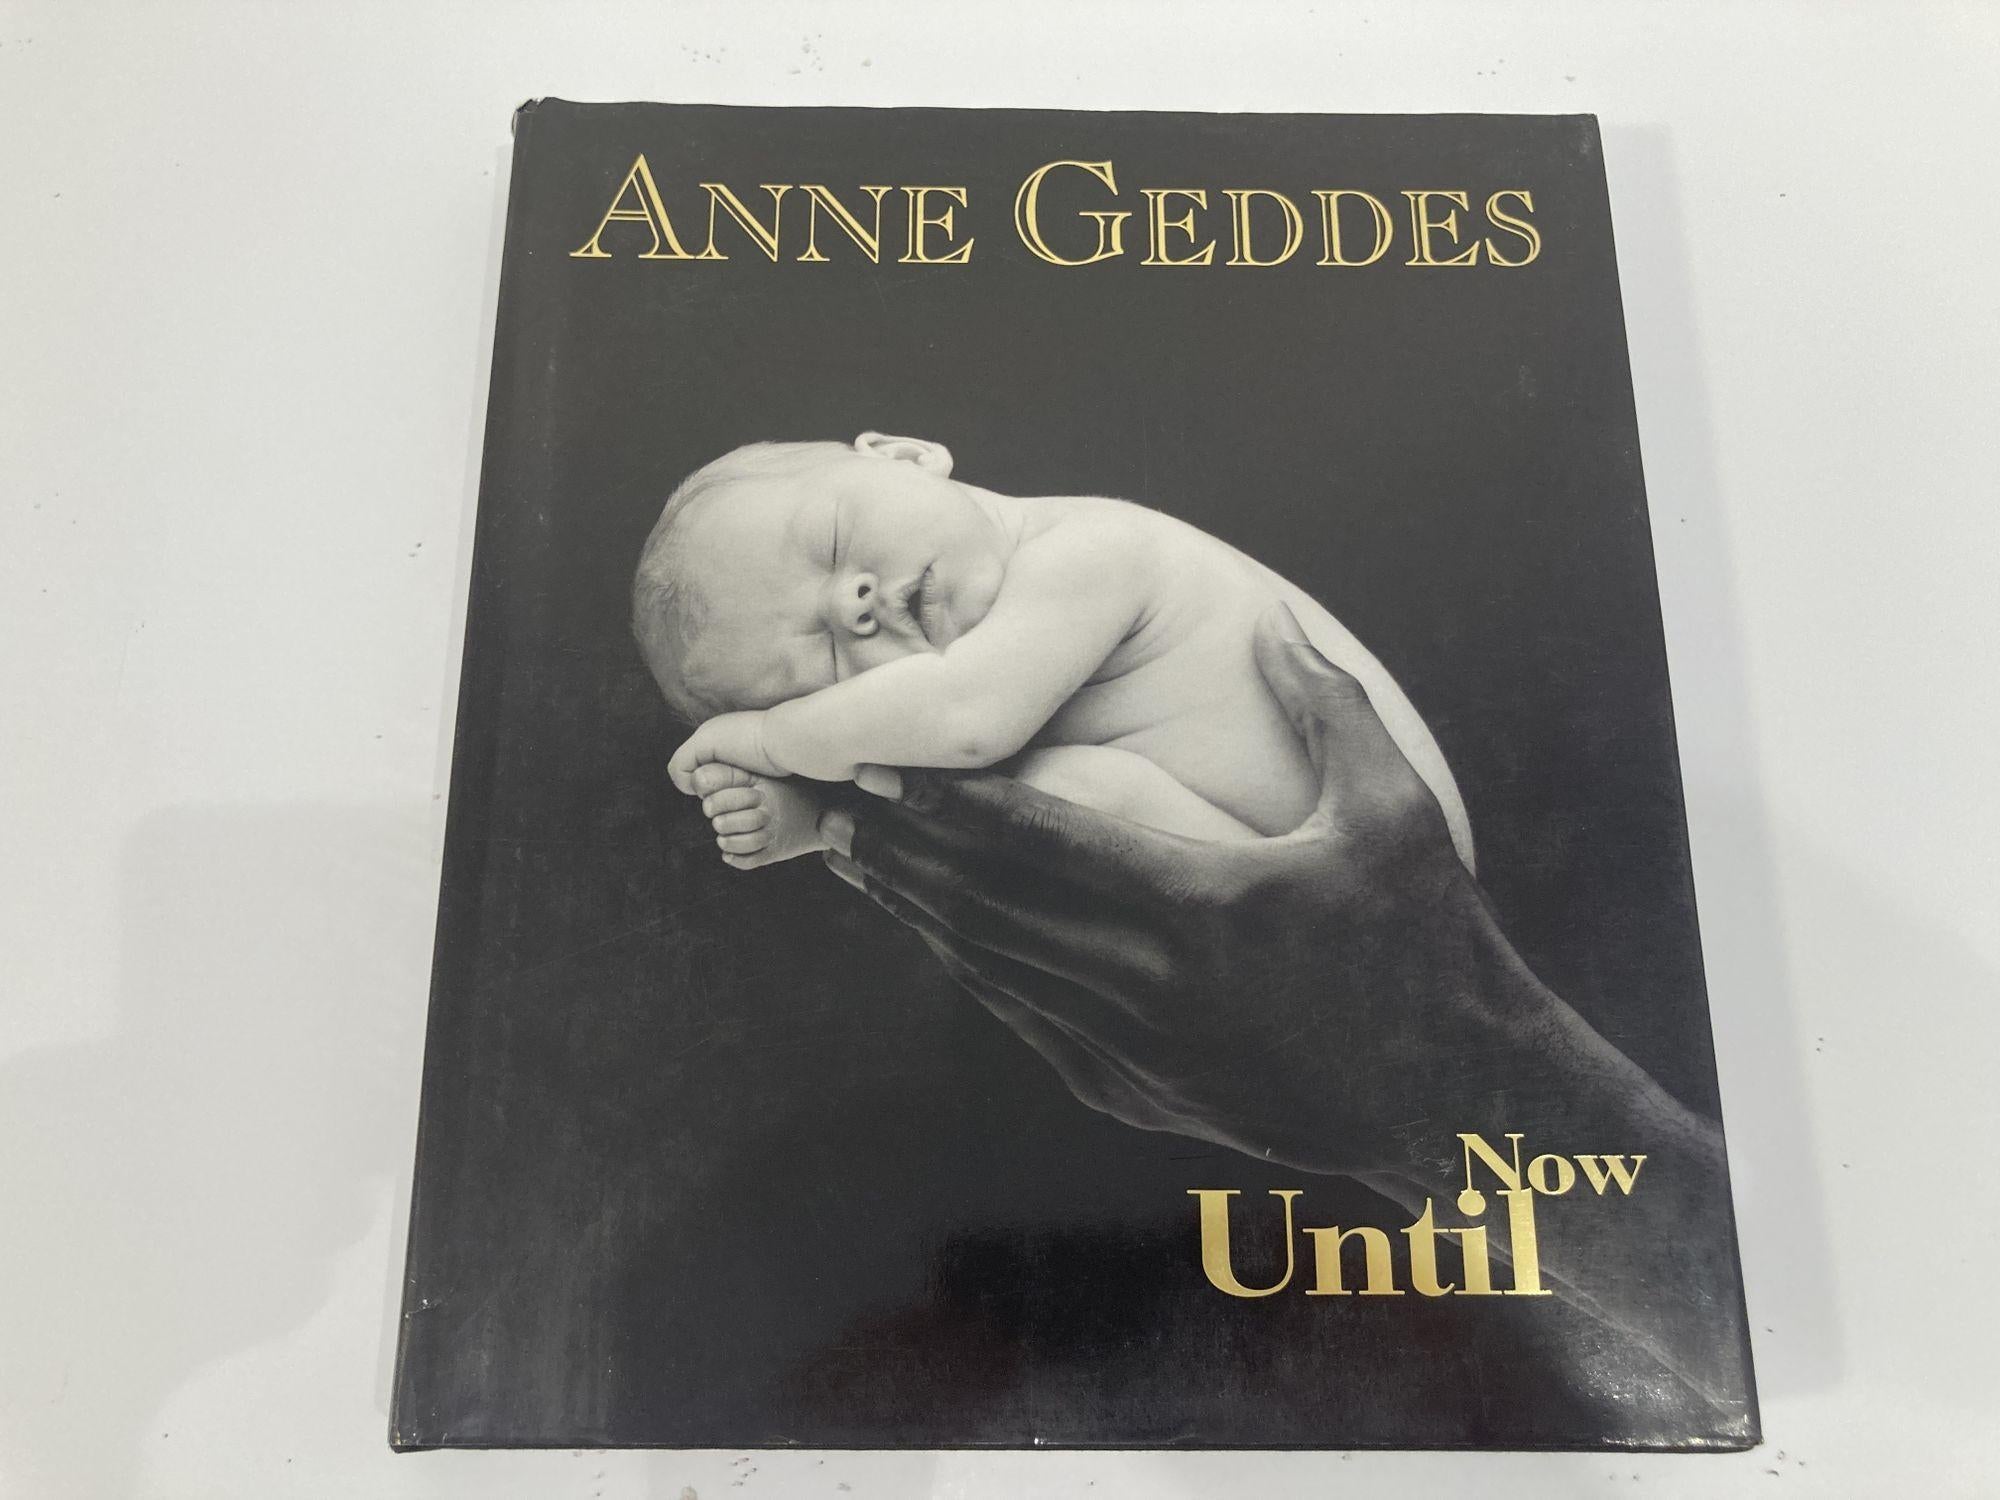 Anne Geddes Until Now Photofolio.
Large heavy coffee table hardcover book.
Anne Geddes is the world's bestselling photographer. UNTIL NOW was a major retrospective of ten years of her work featuring all her best-known images together with many